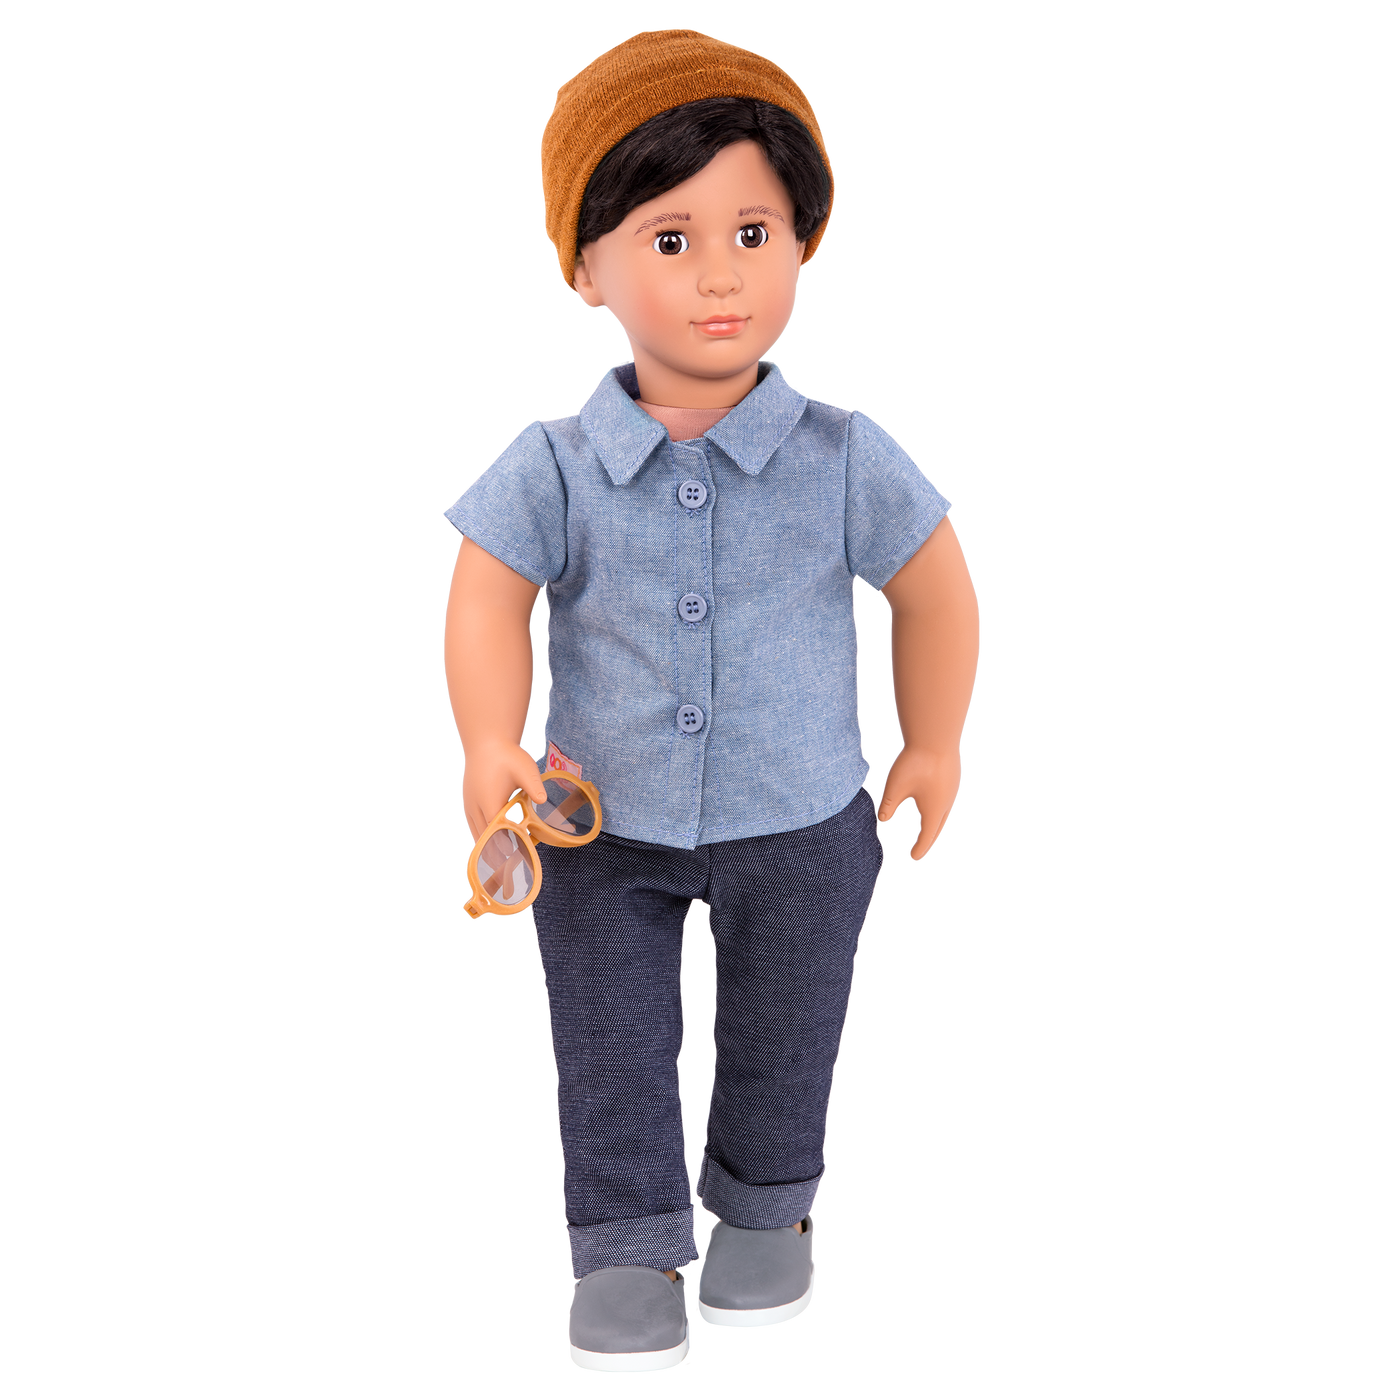 18-inch boy doll with dark-brown hair and brown eyes